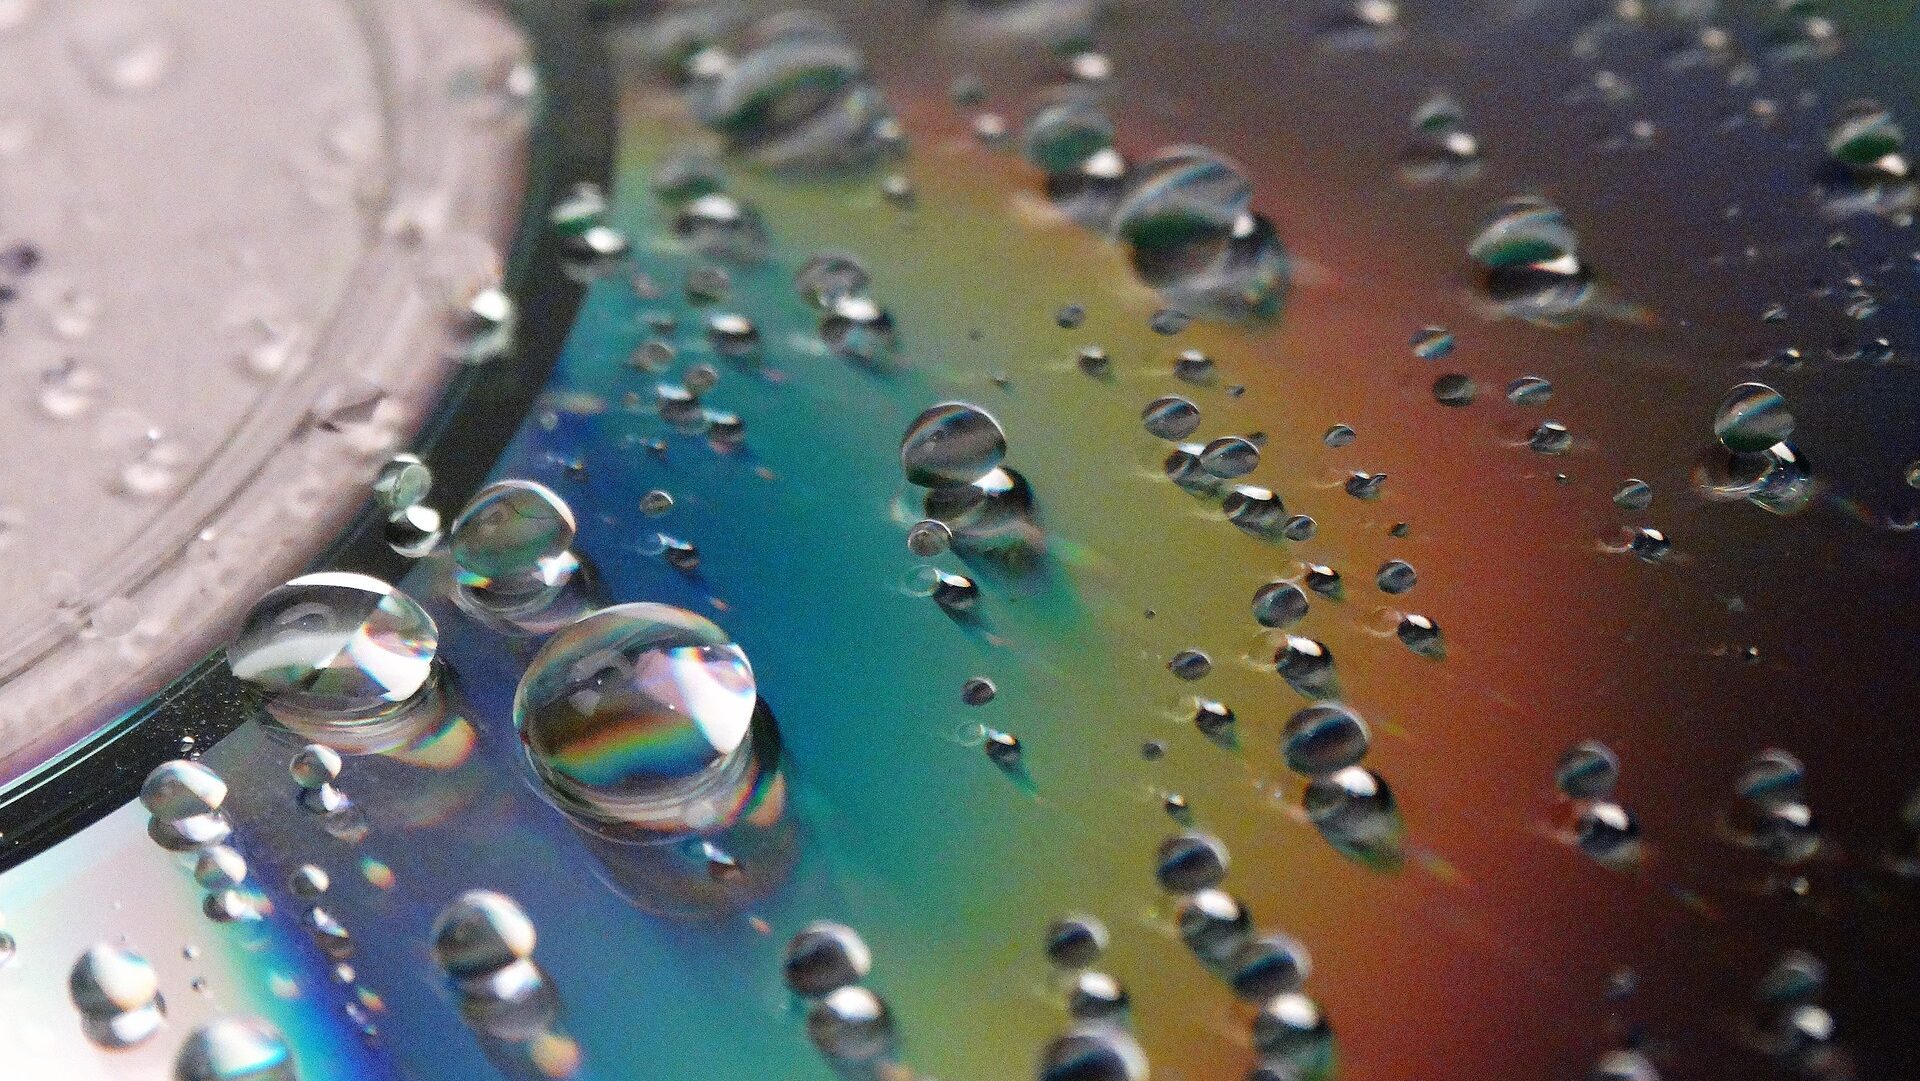 CD with waterdrops on it.